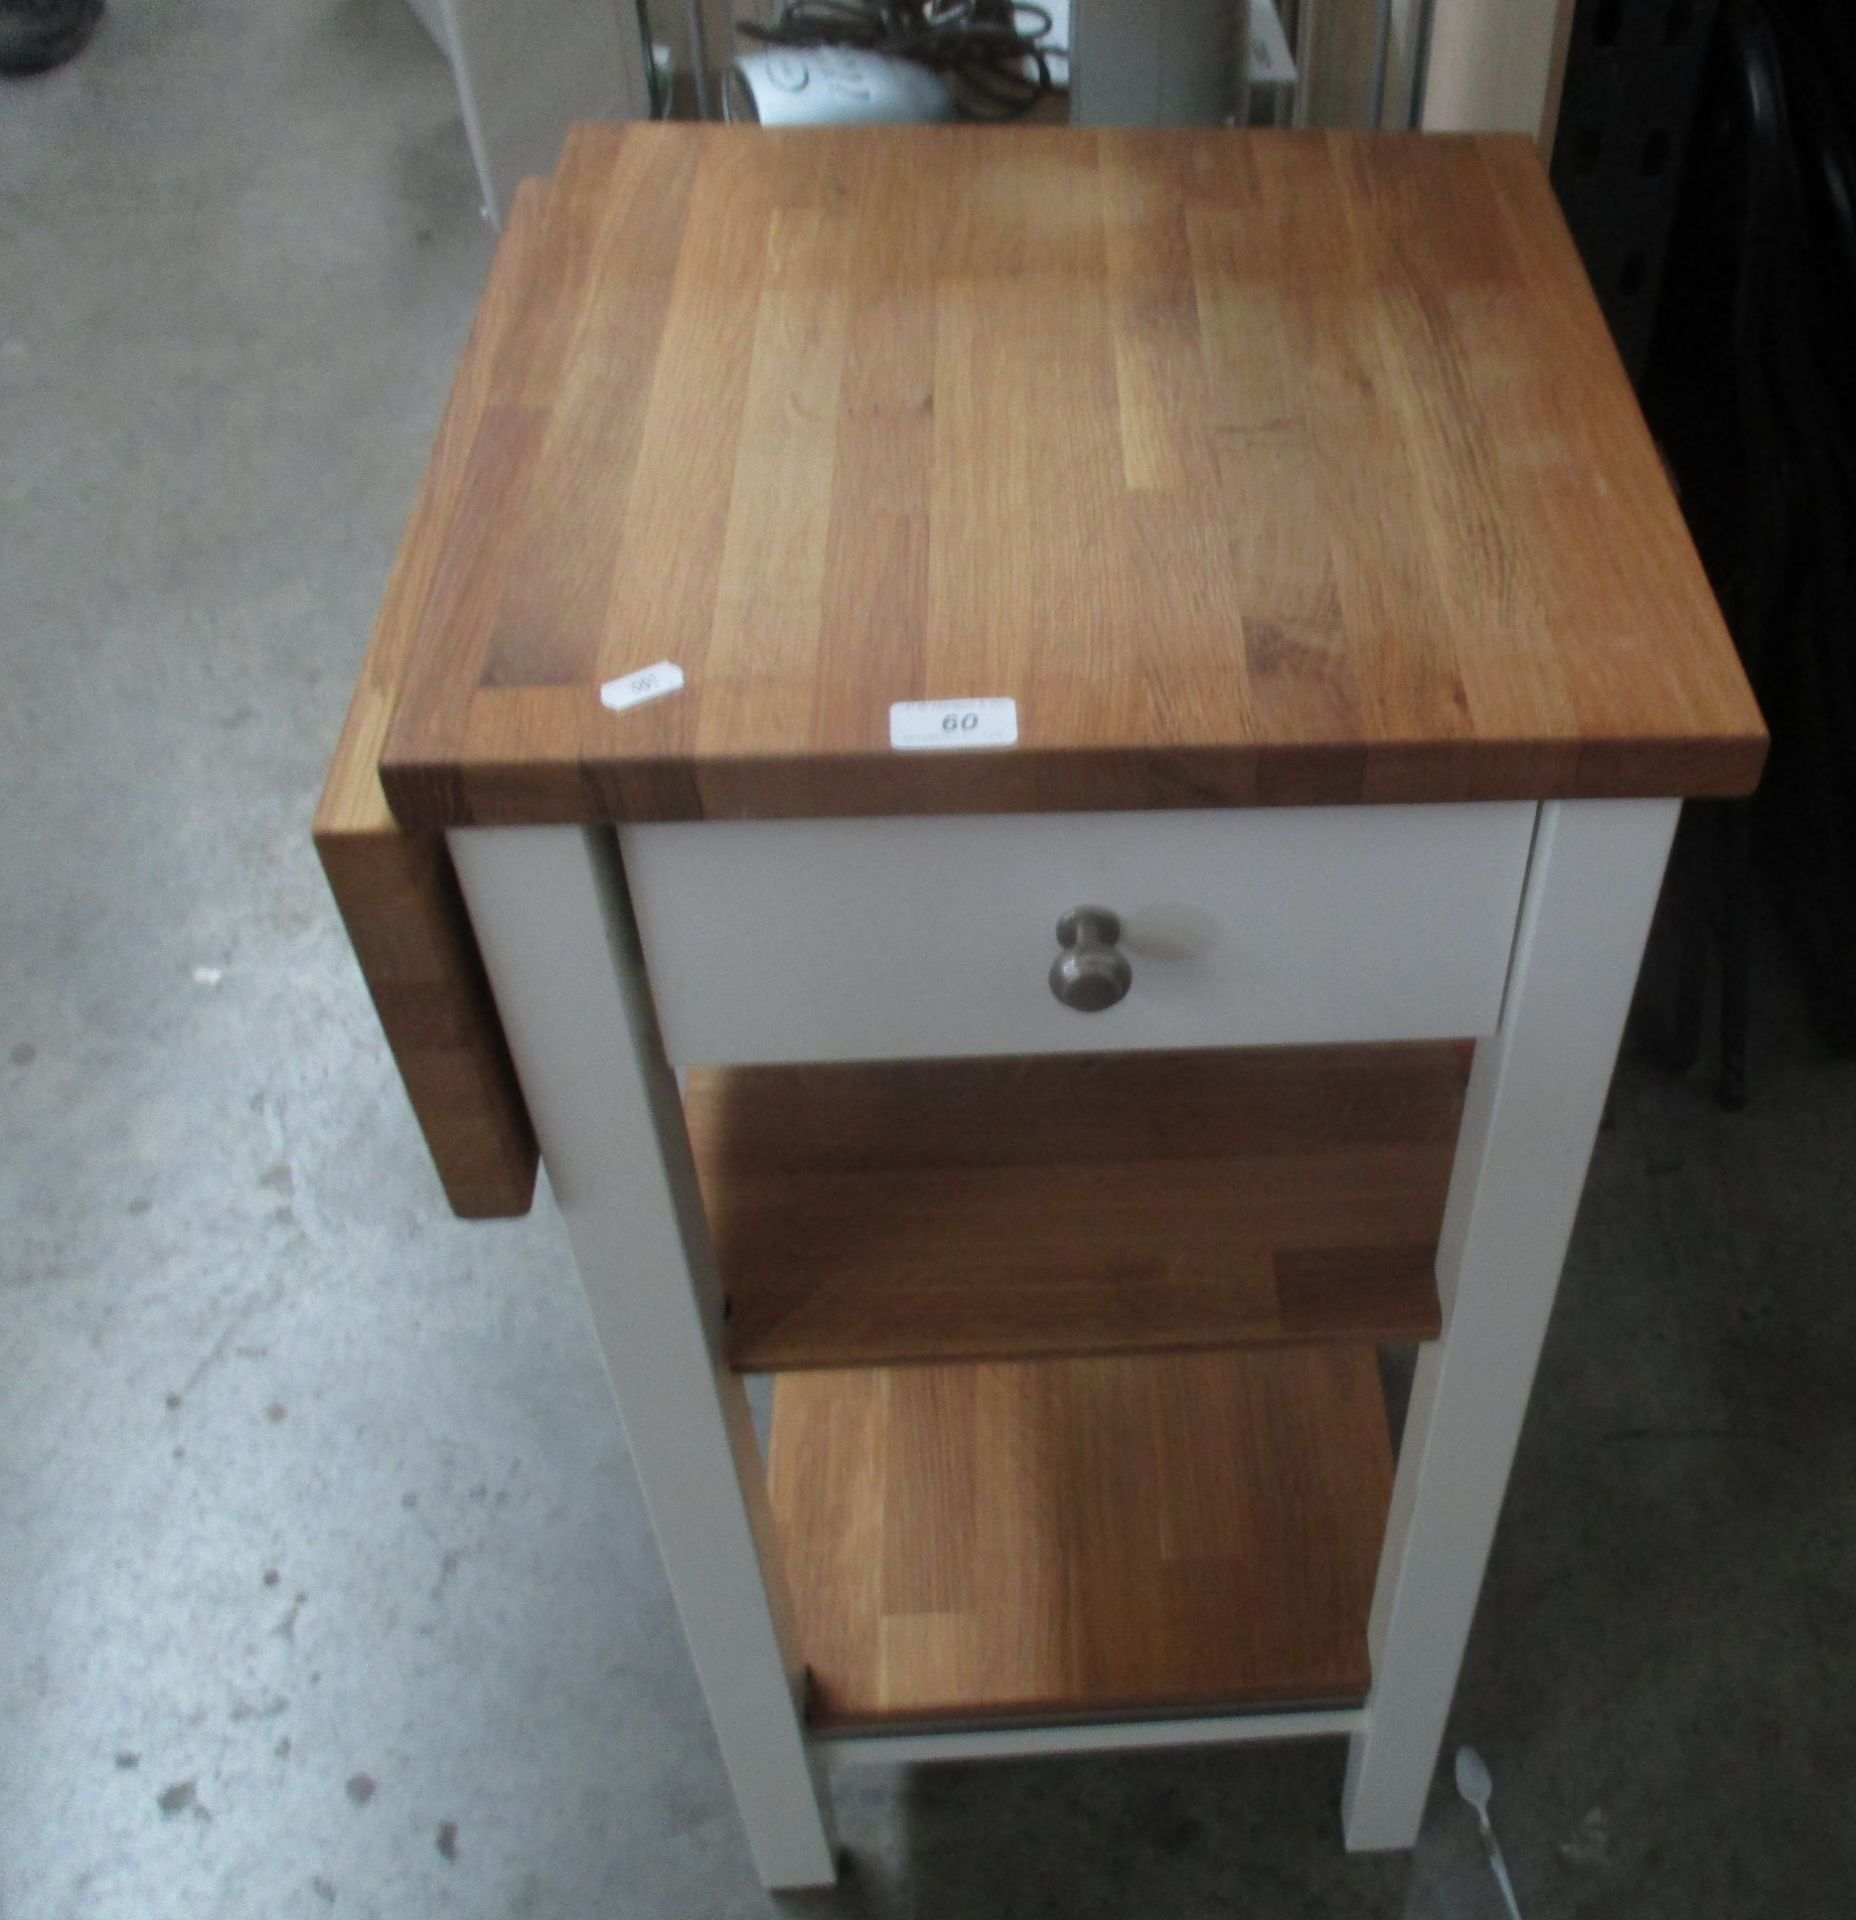 A mobile wooden single drawer kitchen chopping counter